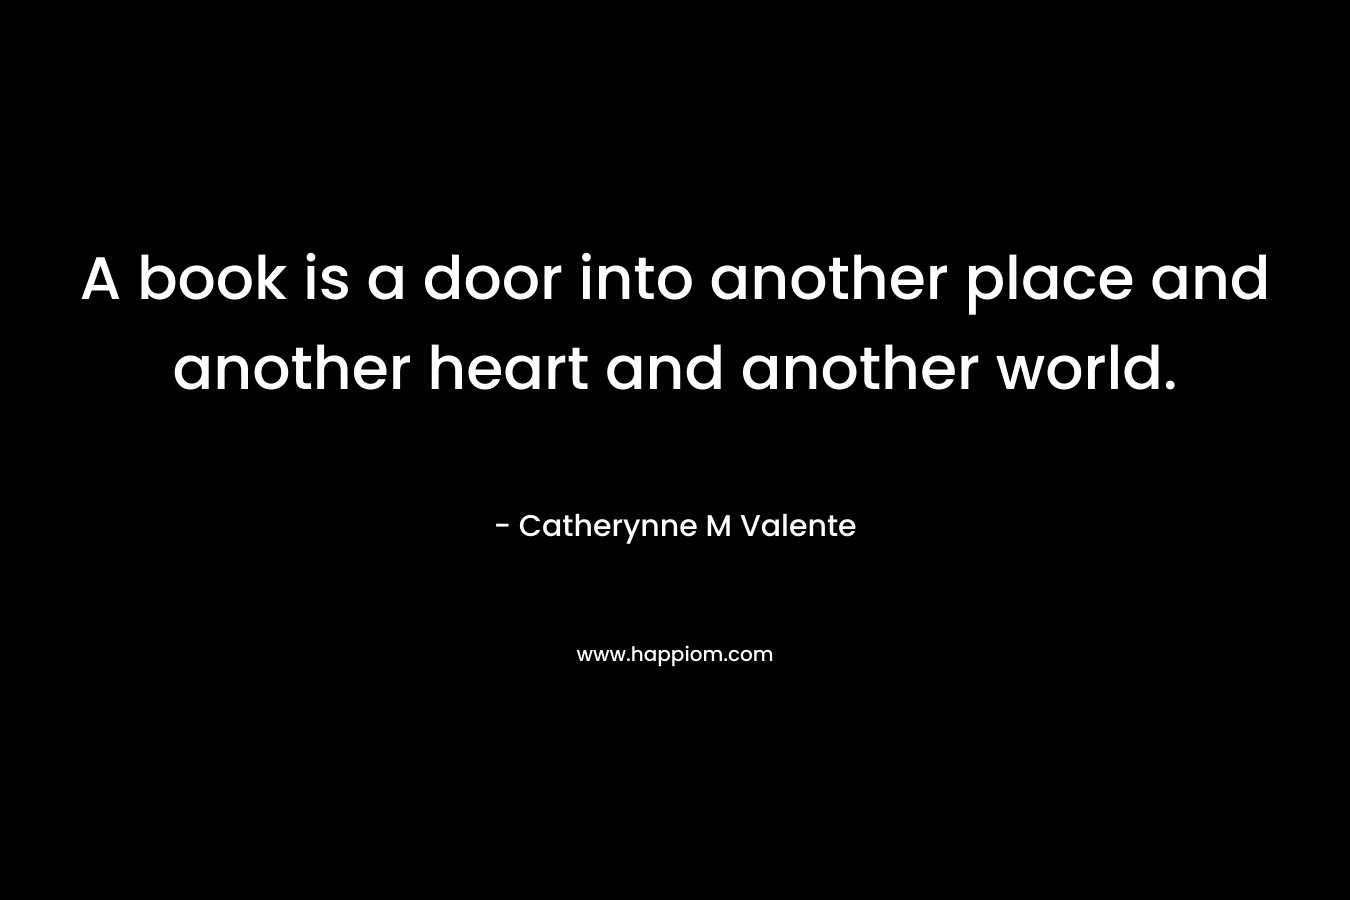 A book is a door into another place and another heart and another world.